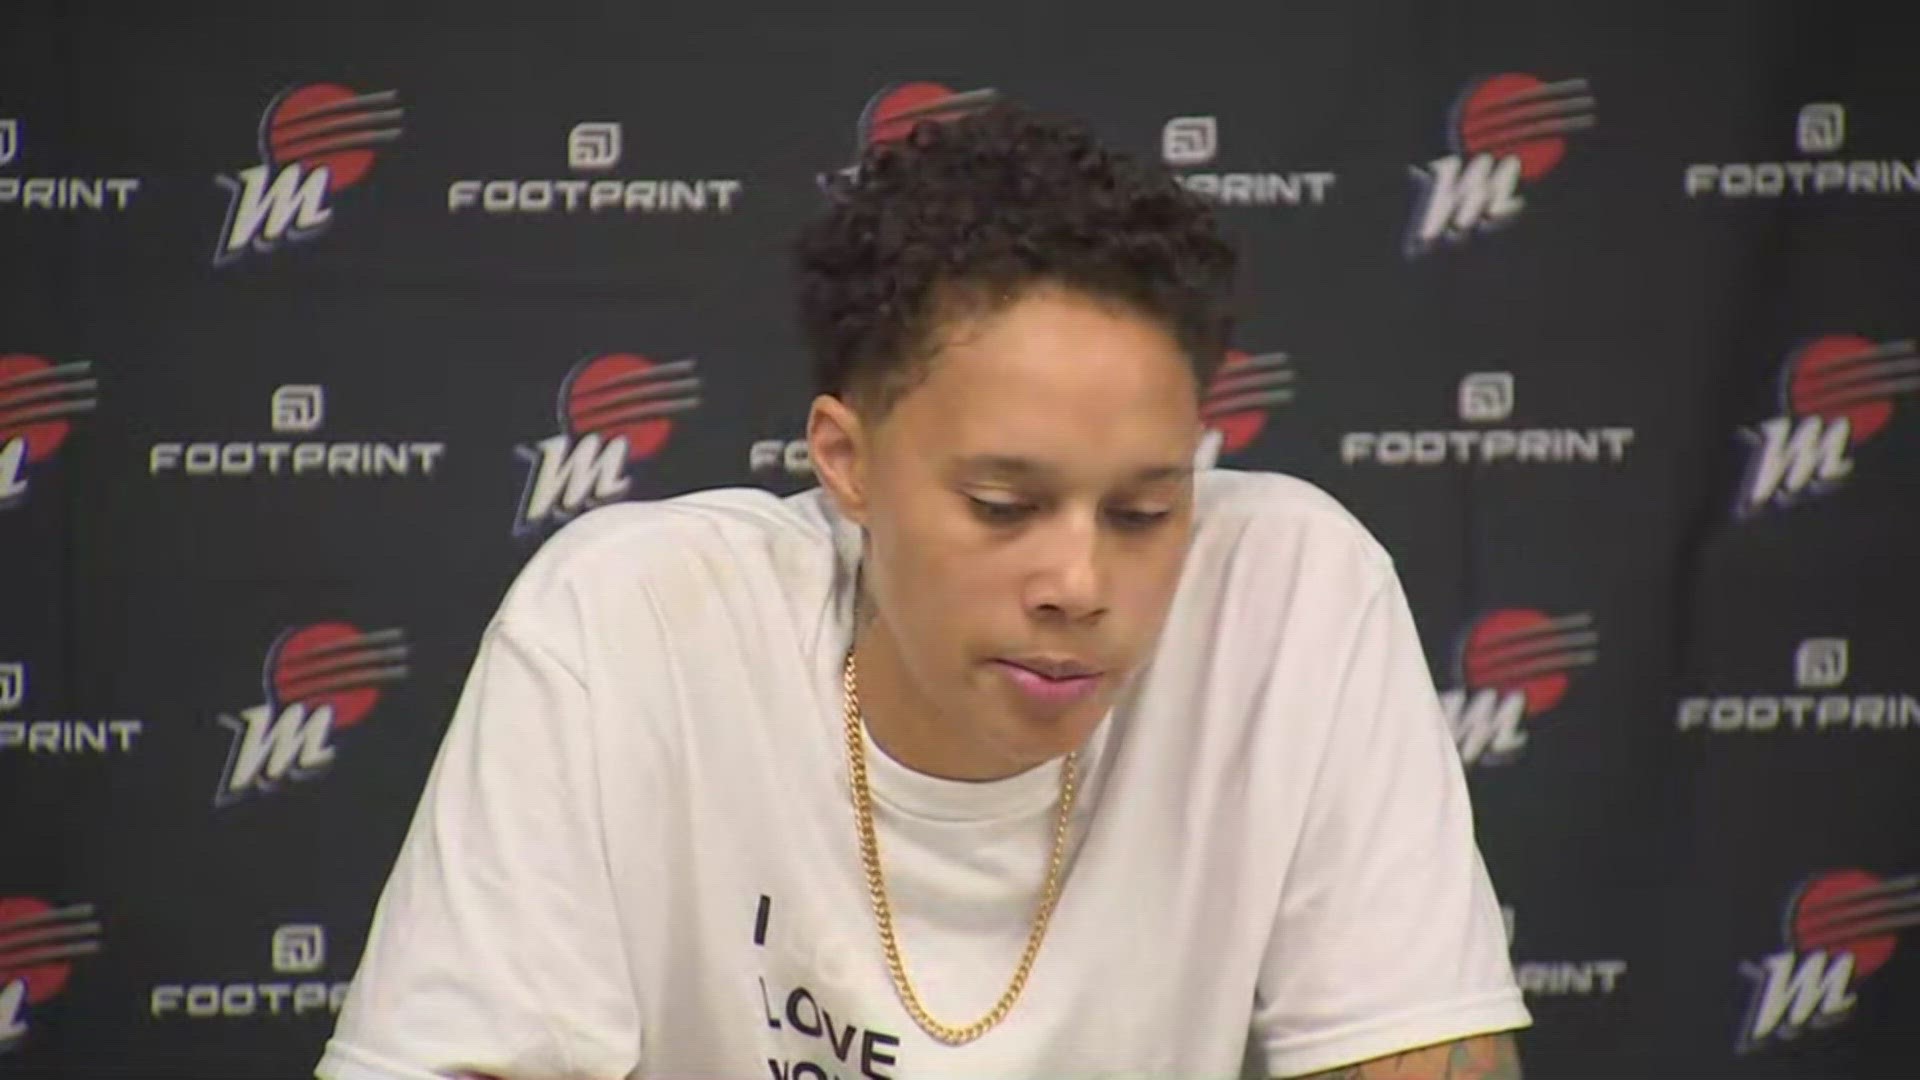 Griner is encouraging people to use their voice and help share the stories of families who have loved ones detained. "Never give up hope," she said.